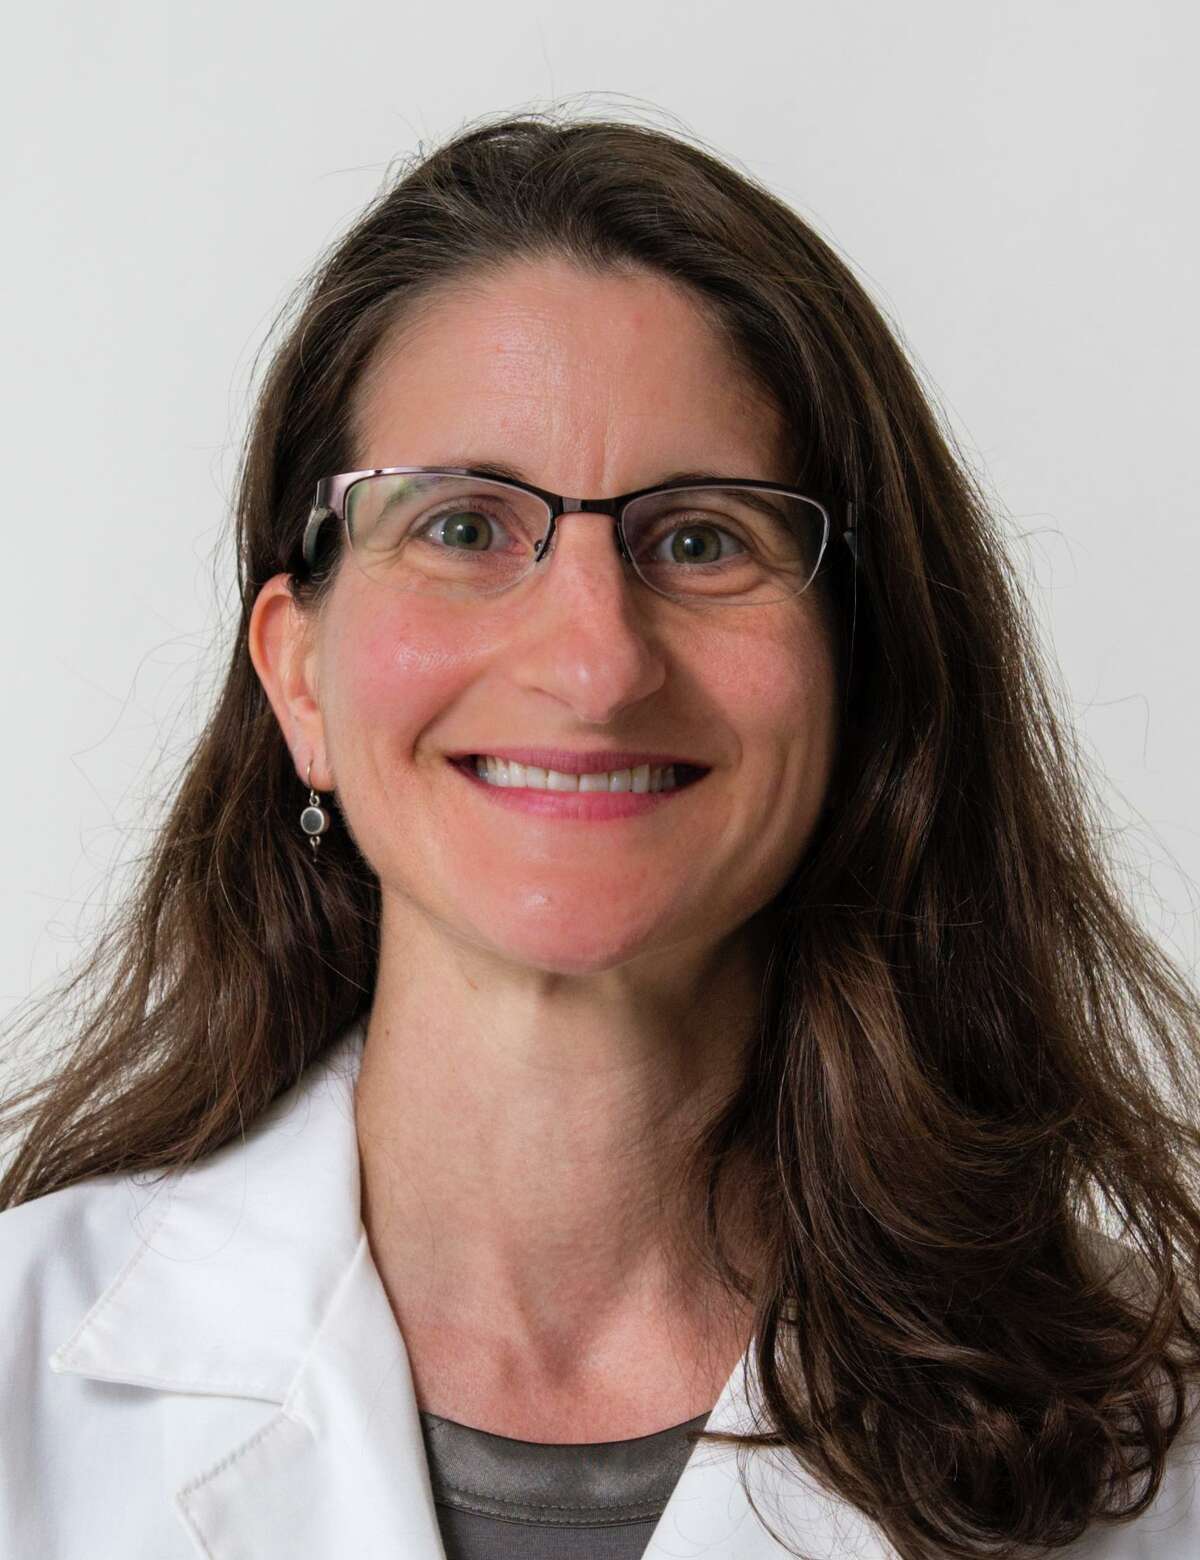 Dr. Jody Terranova is the president-elect of the Connecticut chapter of the American Academy of Pediatrics. She's also an assistant professor of pediatrics at the University of Connecticut and a primary care pediatrician in Hartford.